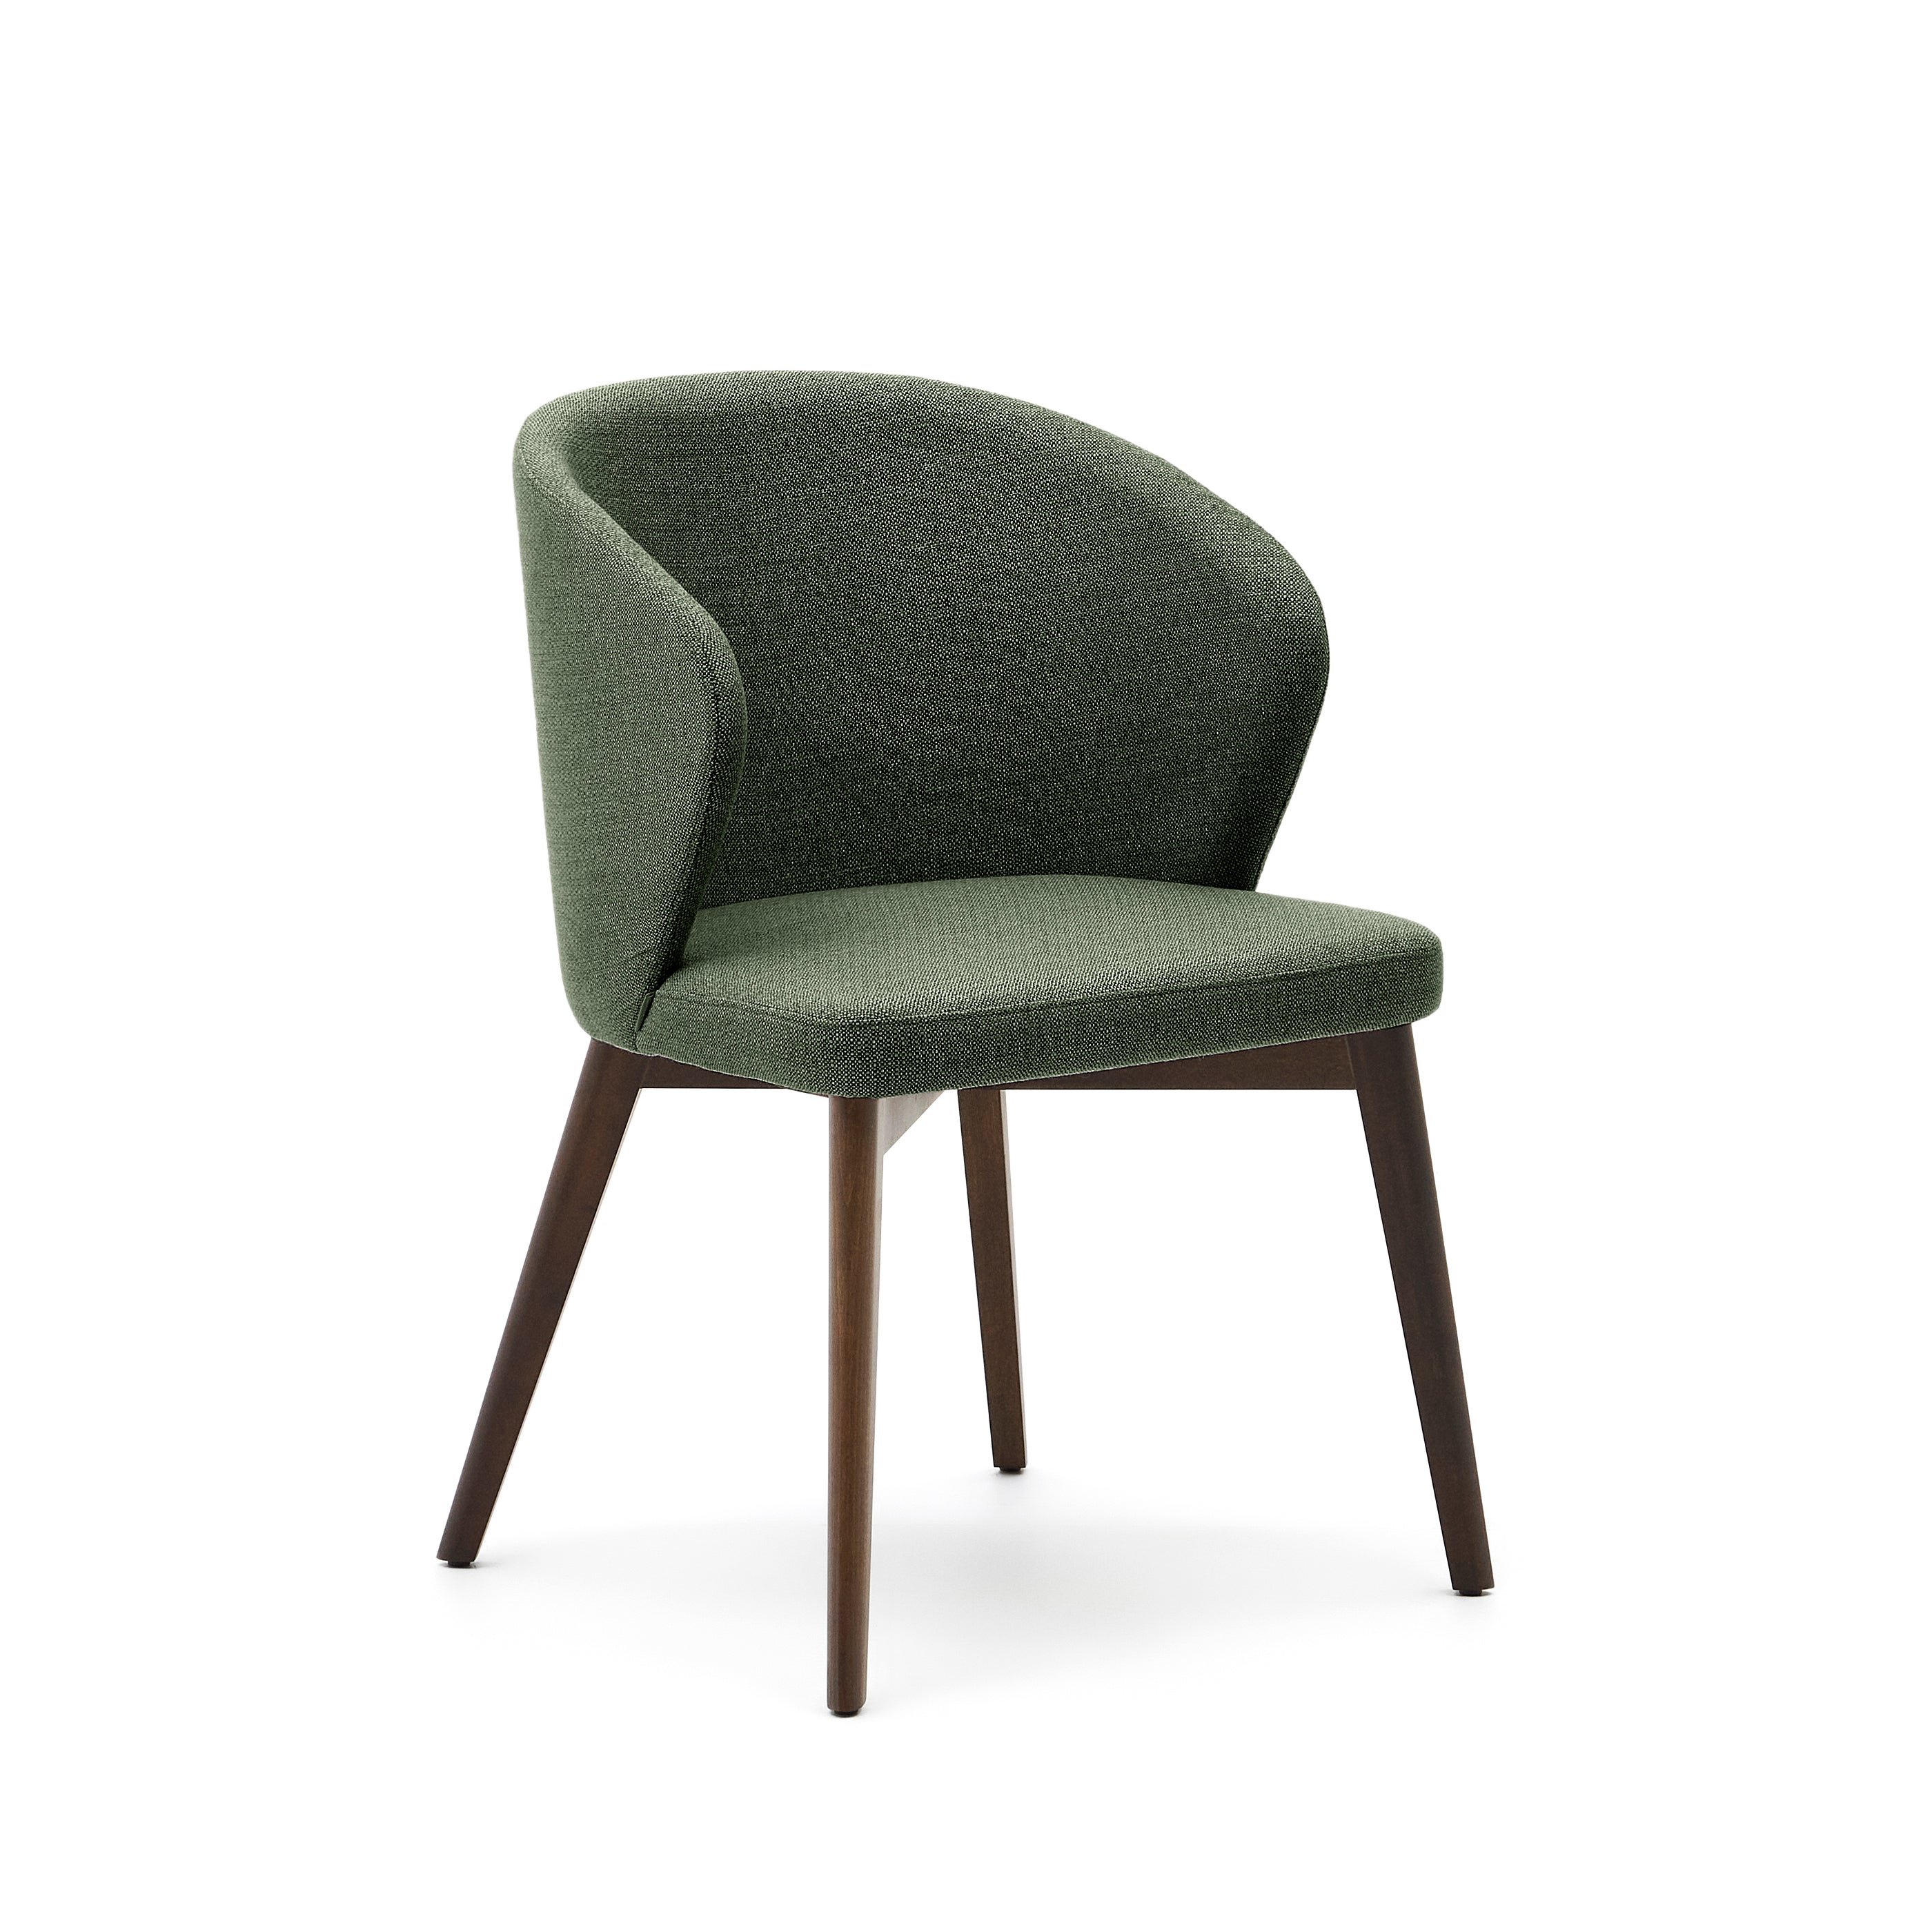 Darice chair with green upholstery and 100% FSC certified solid beech wood with a walnut finish